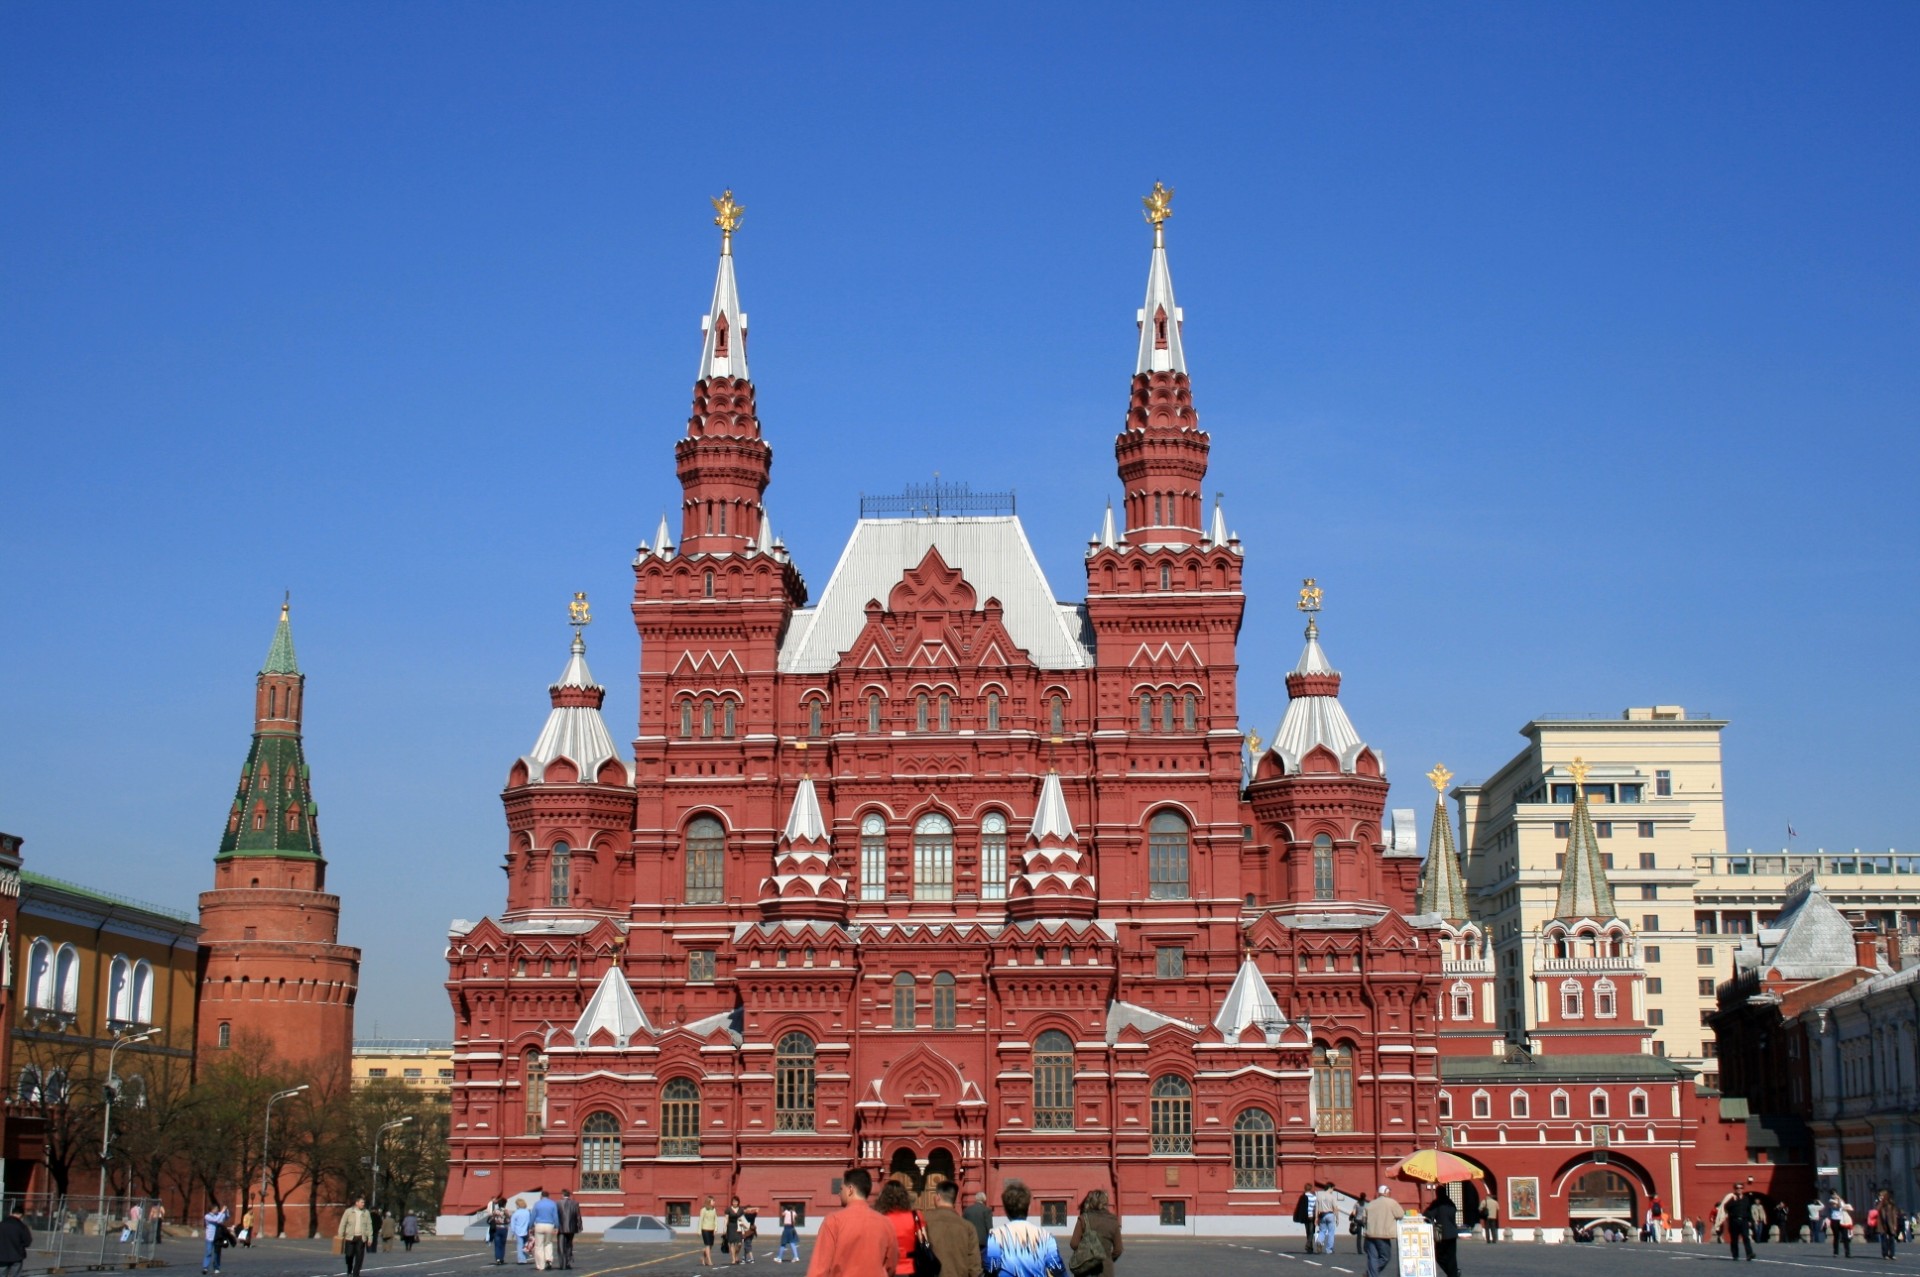 State History Museum on red square in Moscow ,Russia.